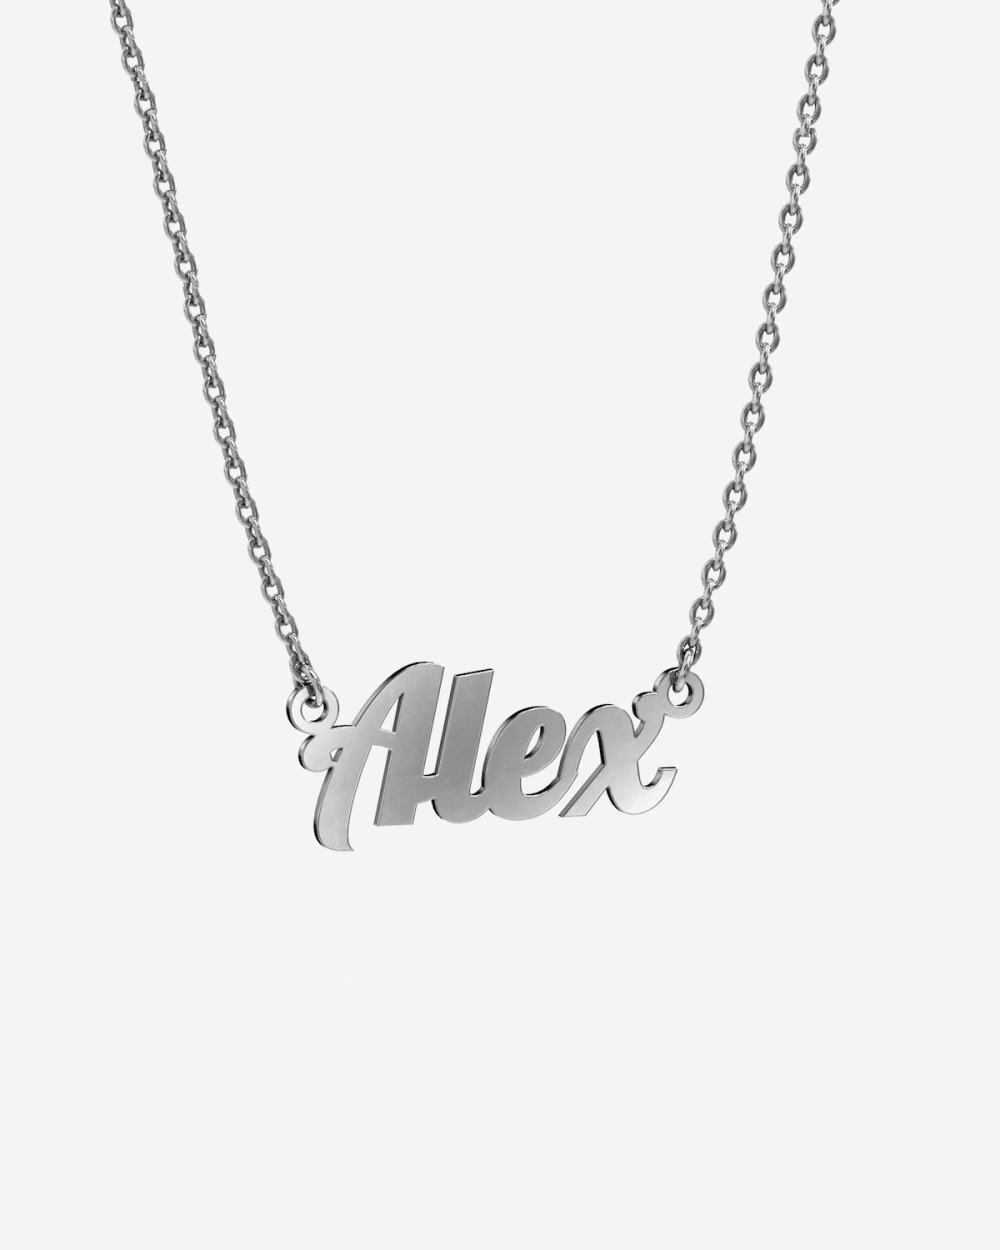 NAME LINK CHAIN NECKLACE